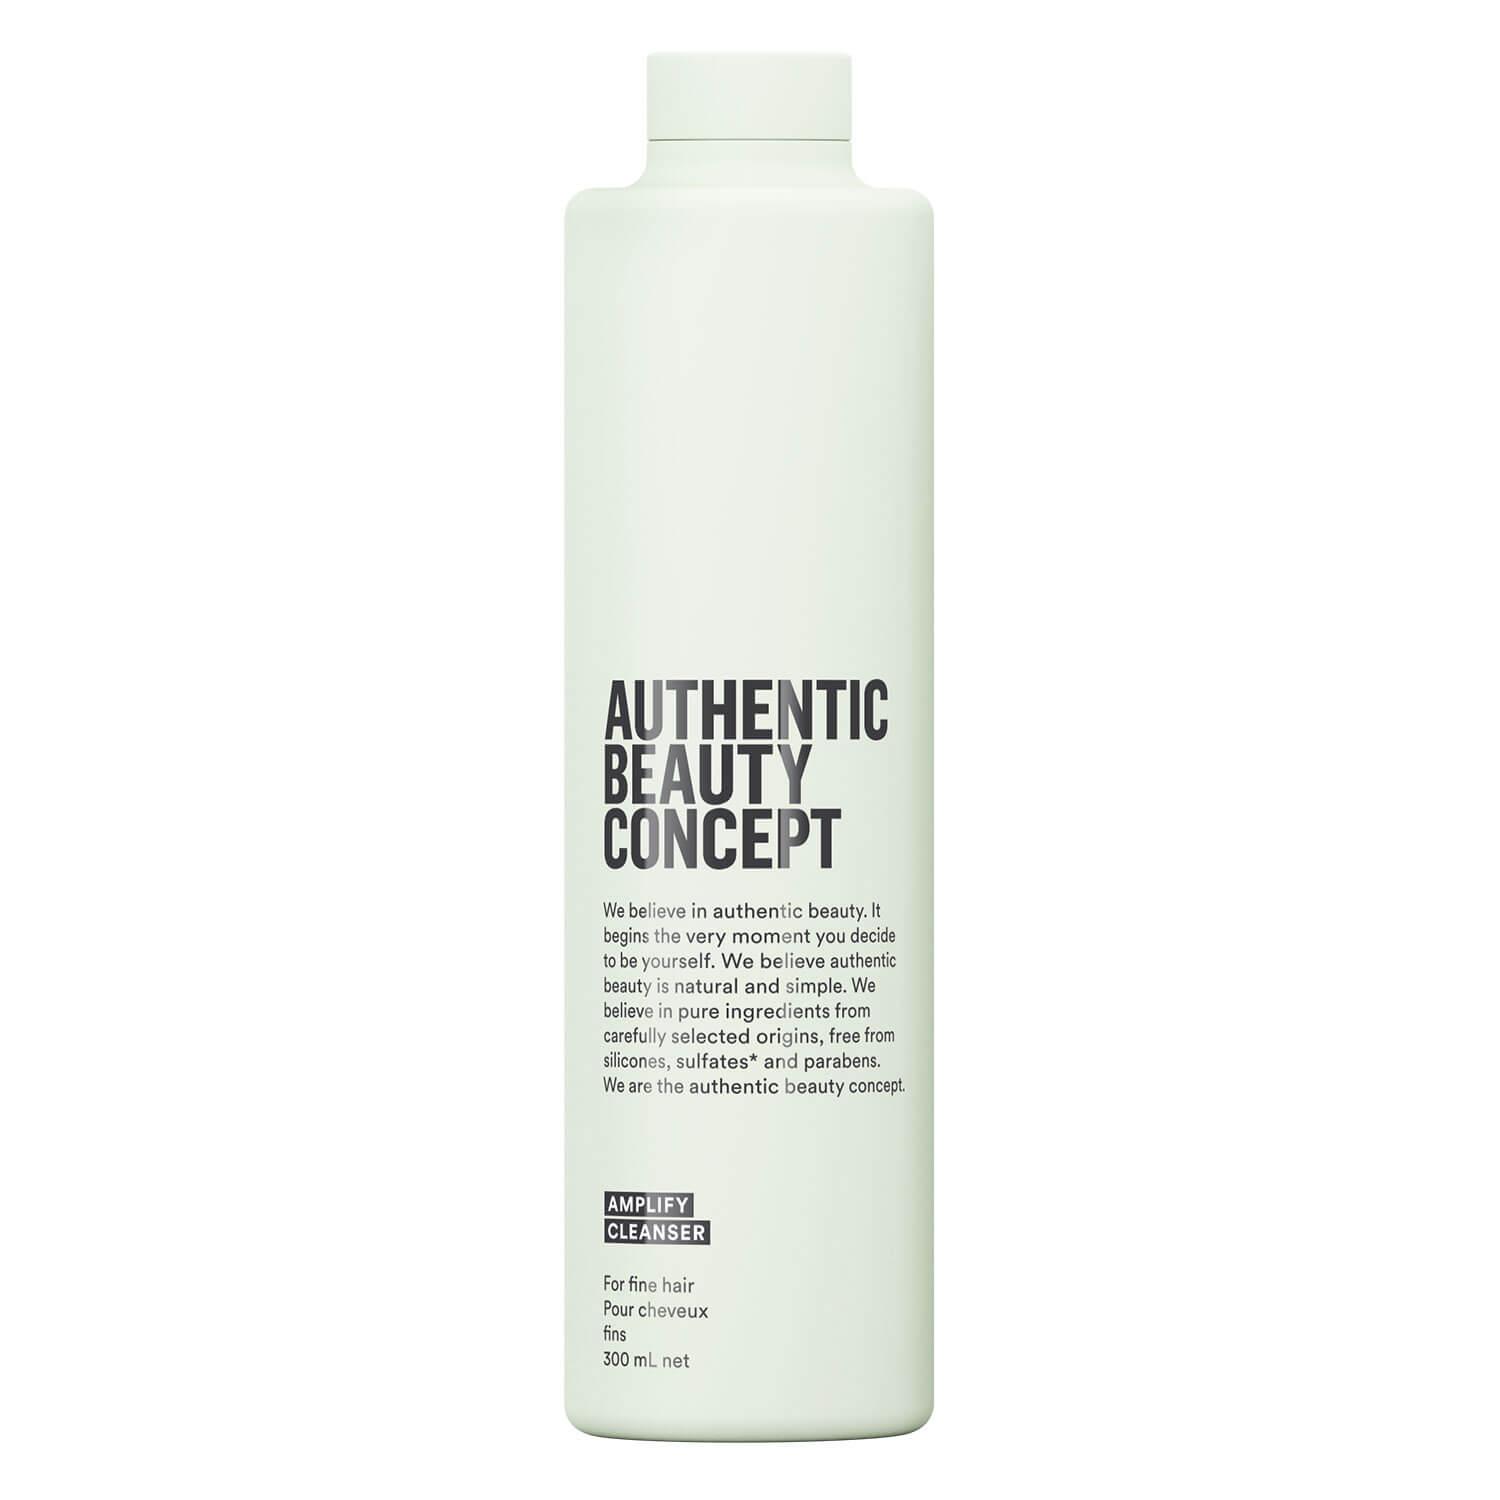 ABC Amplify - Cleanser